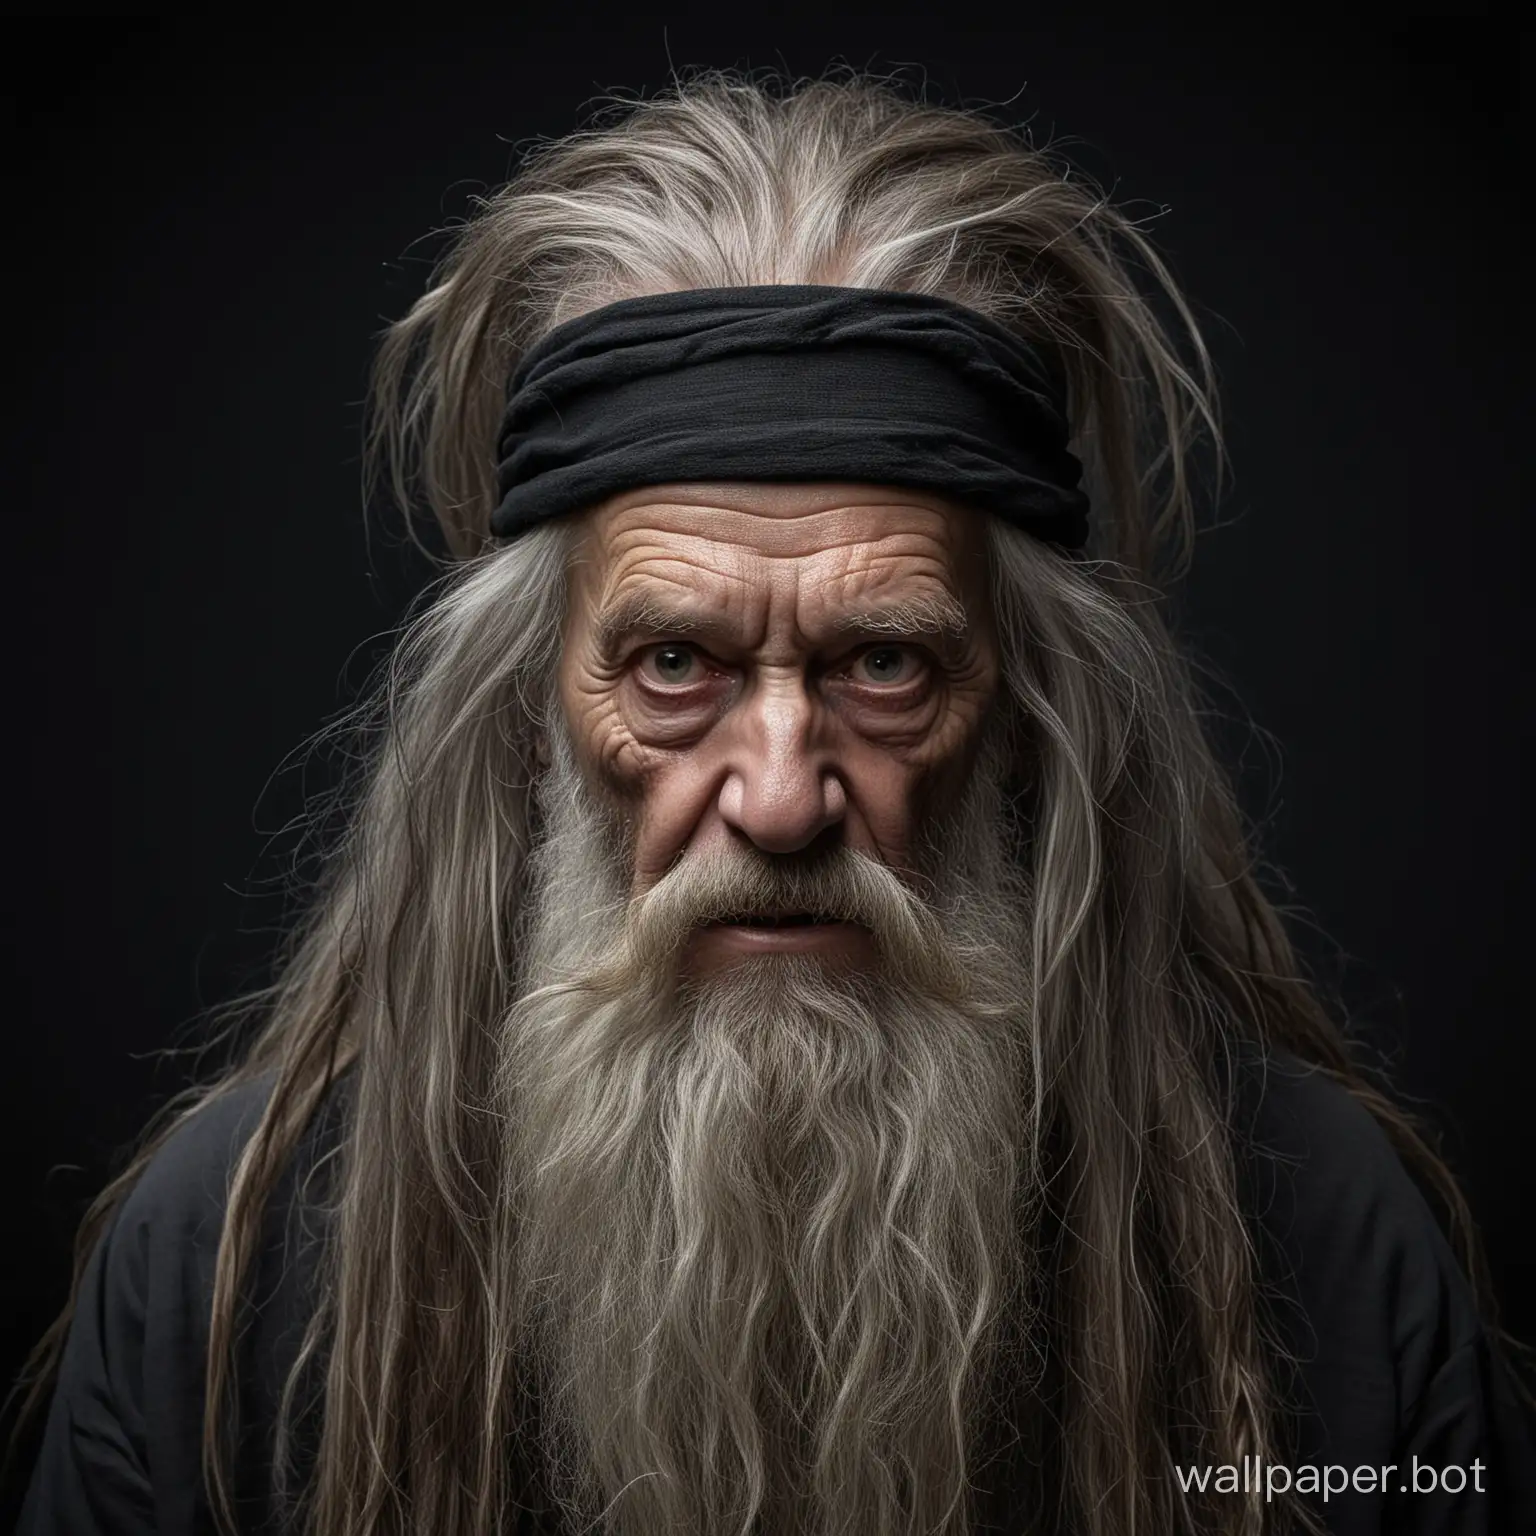 The small, horrible, terrifying, ugly fantasy old man with long hair and a long beard on a black background.